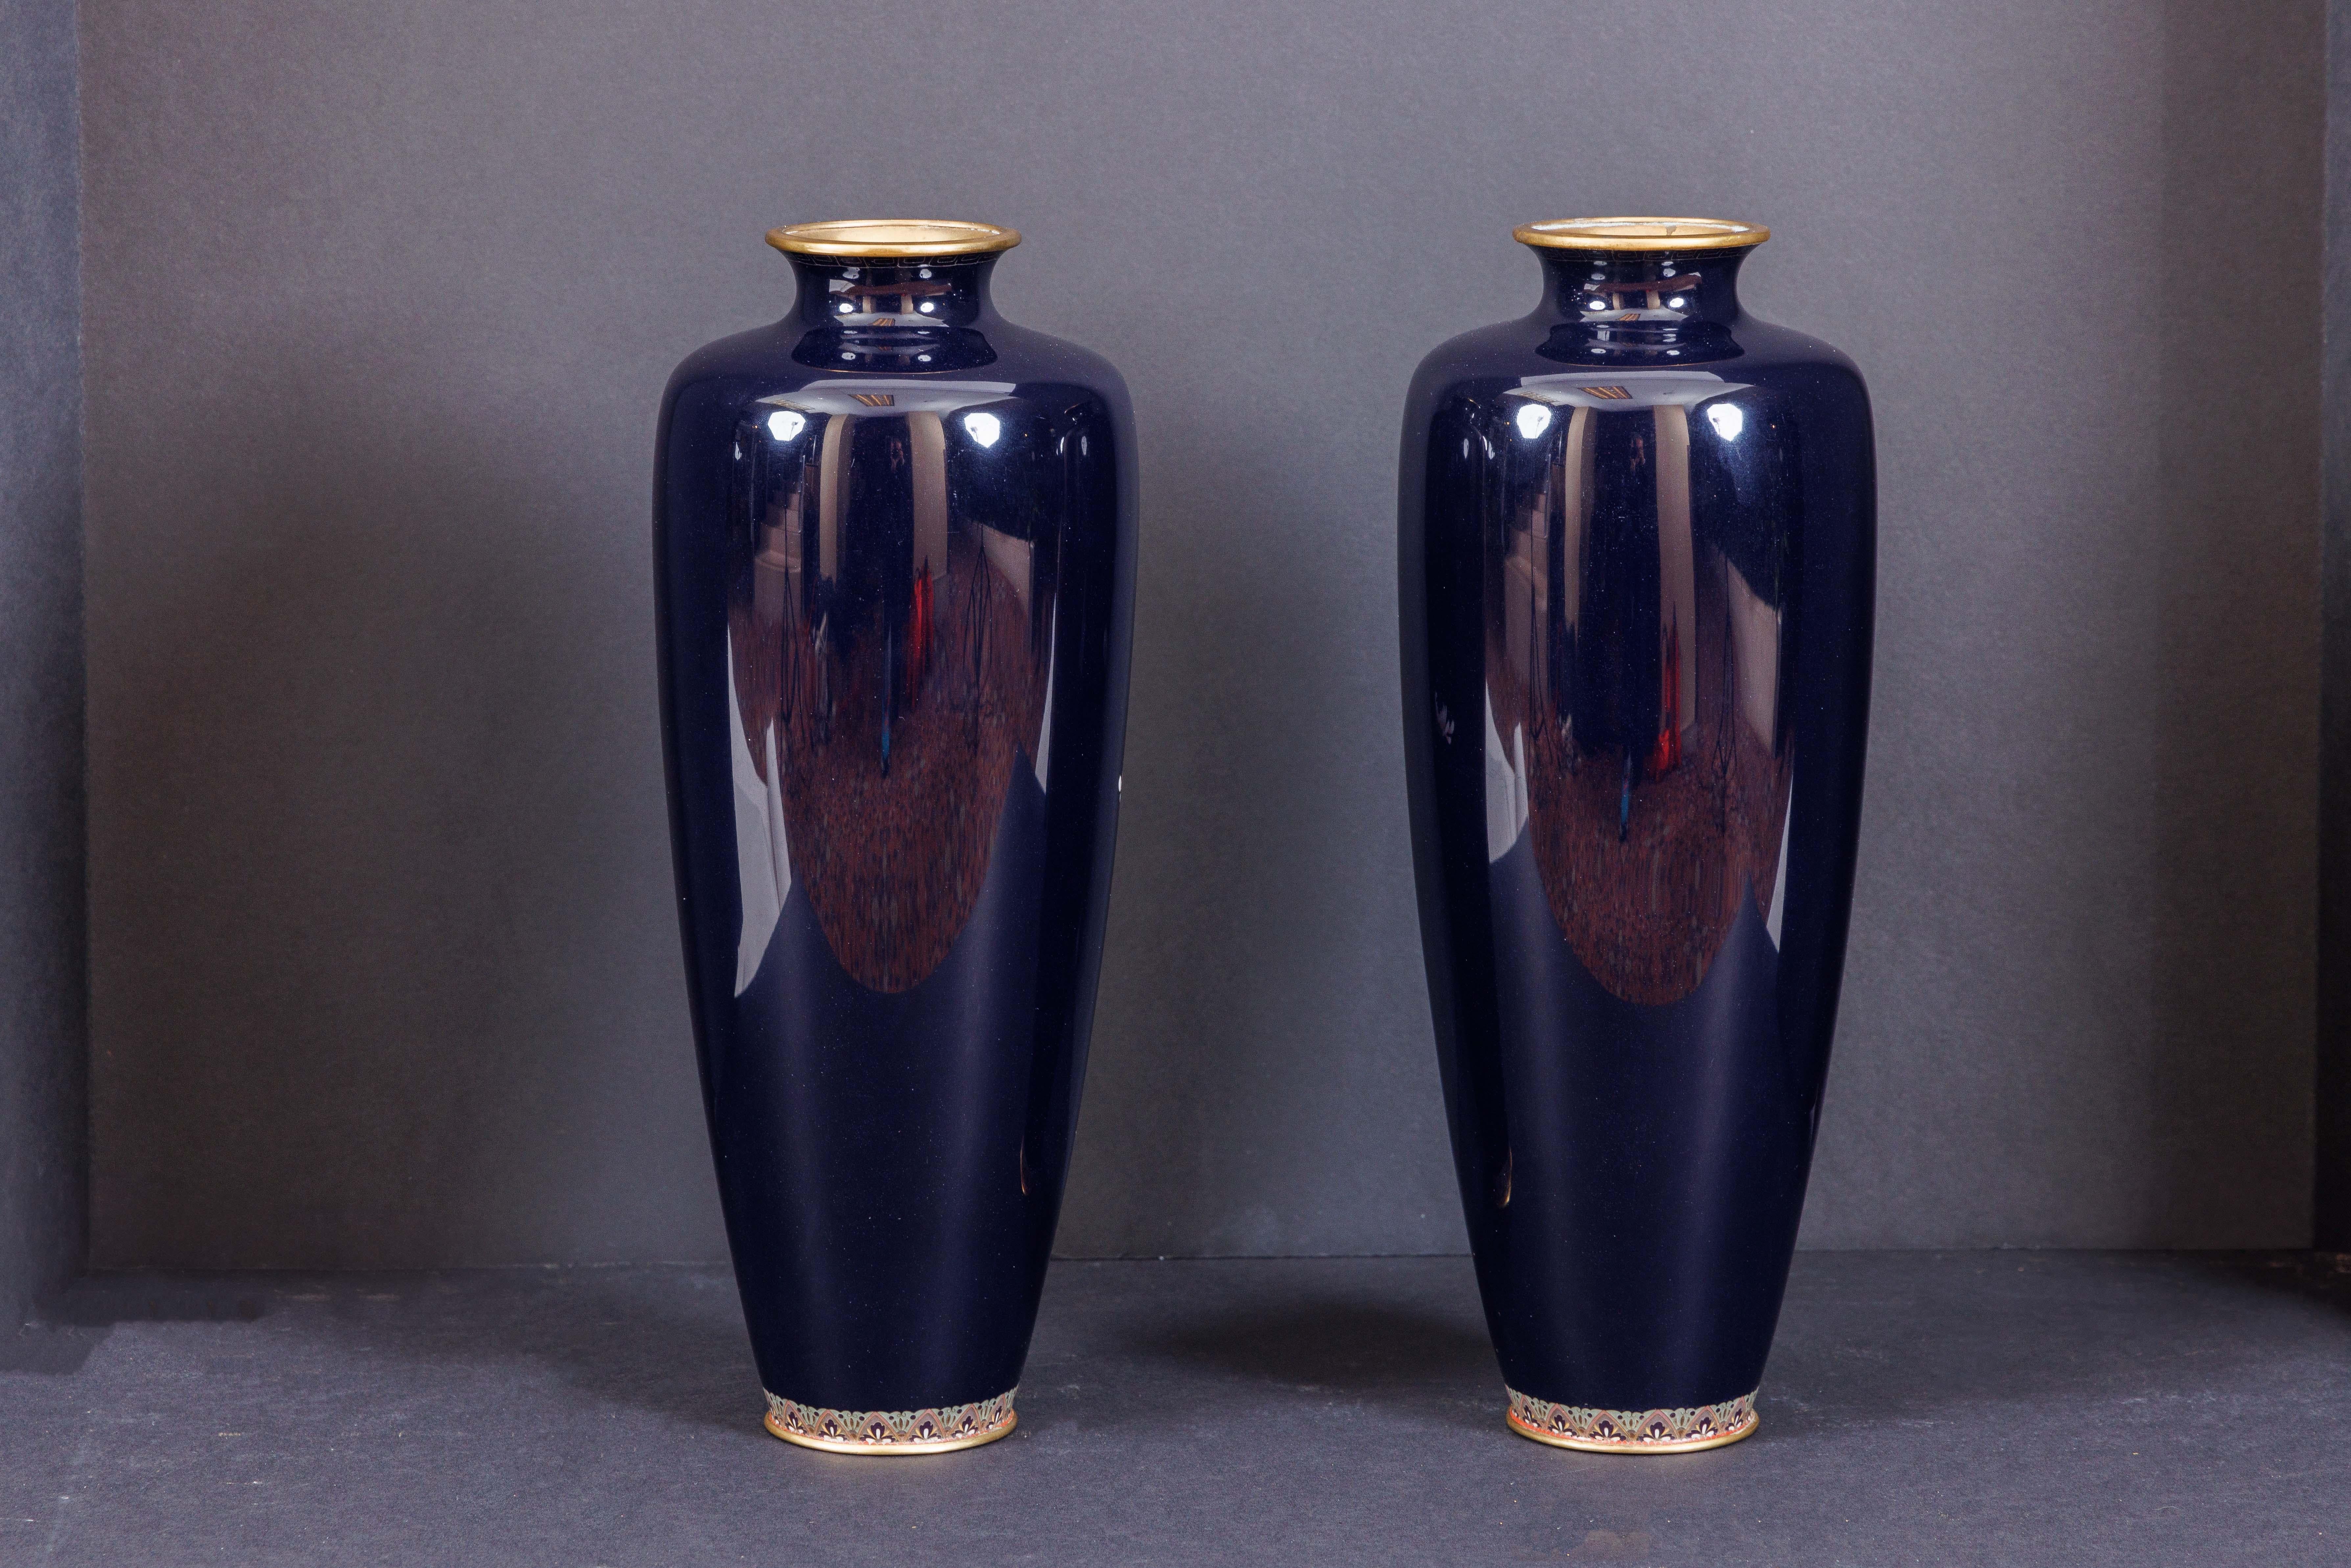 An Exquisite Pair Of Japanese Cloisonné Enamel Vases with Chrysanthemum Blossoms For Sale 6